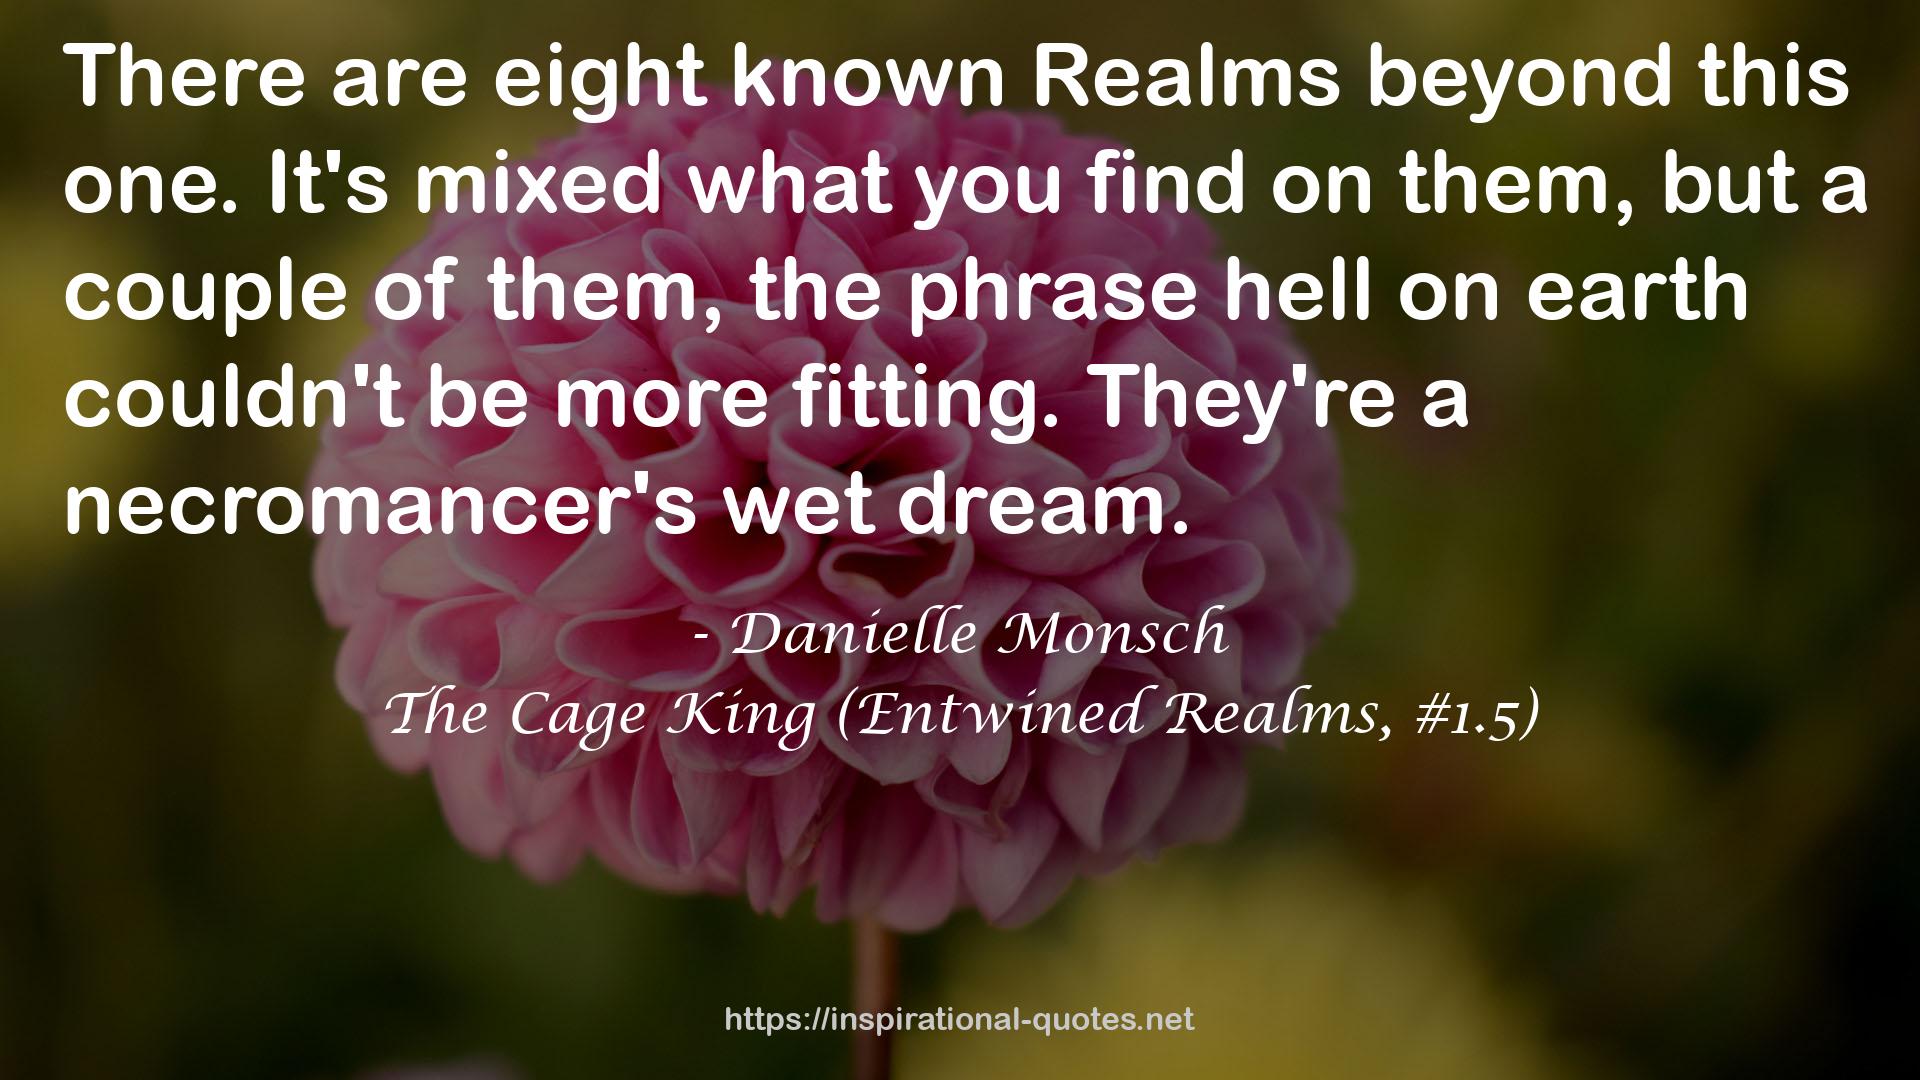 The Cage King (Entwined Realms, #1.5) QUOTES